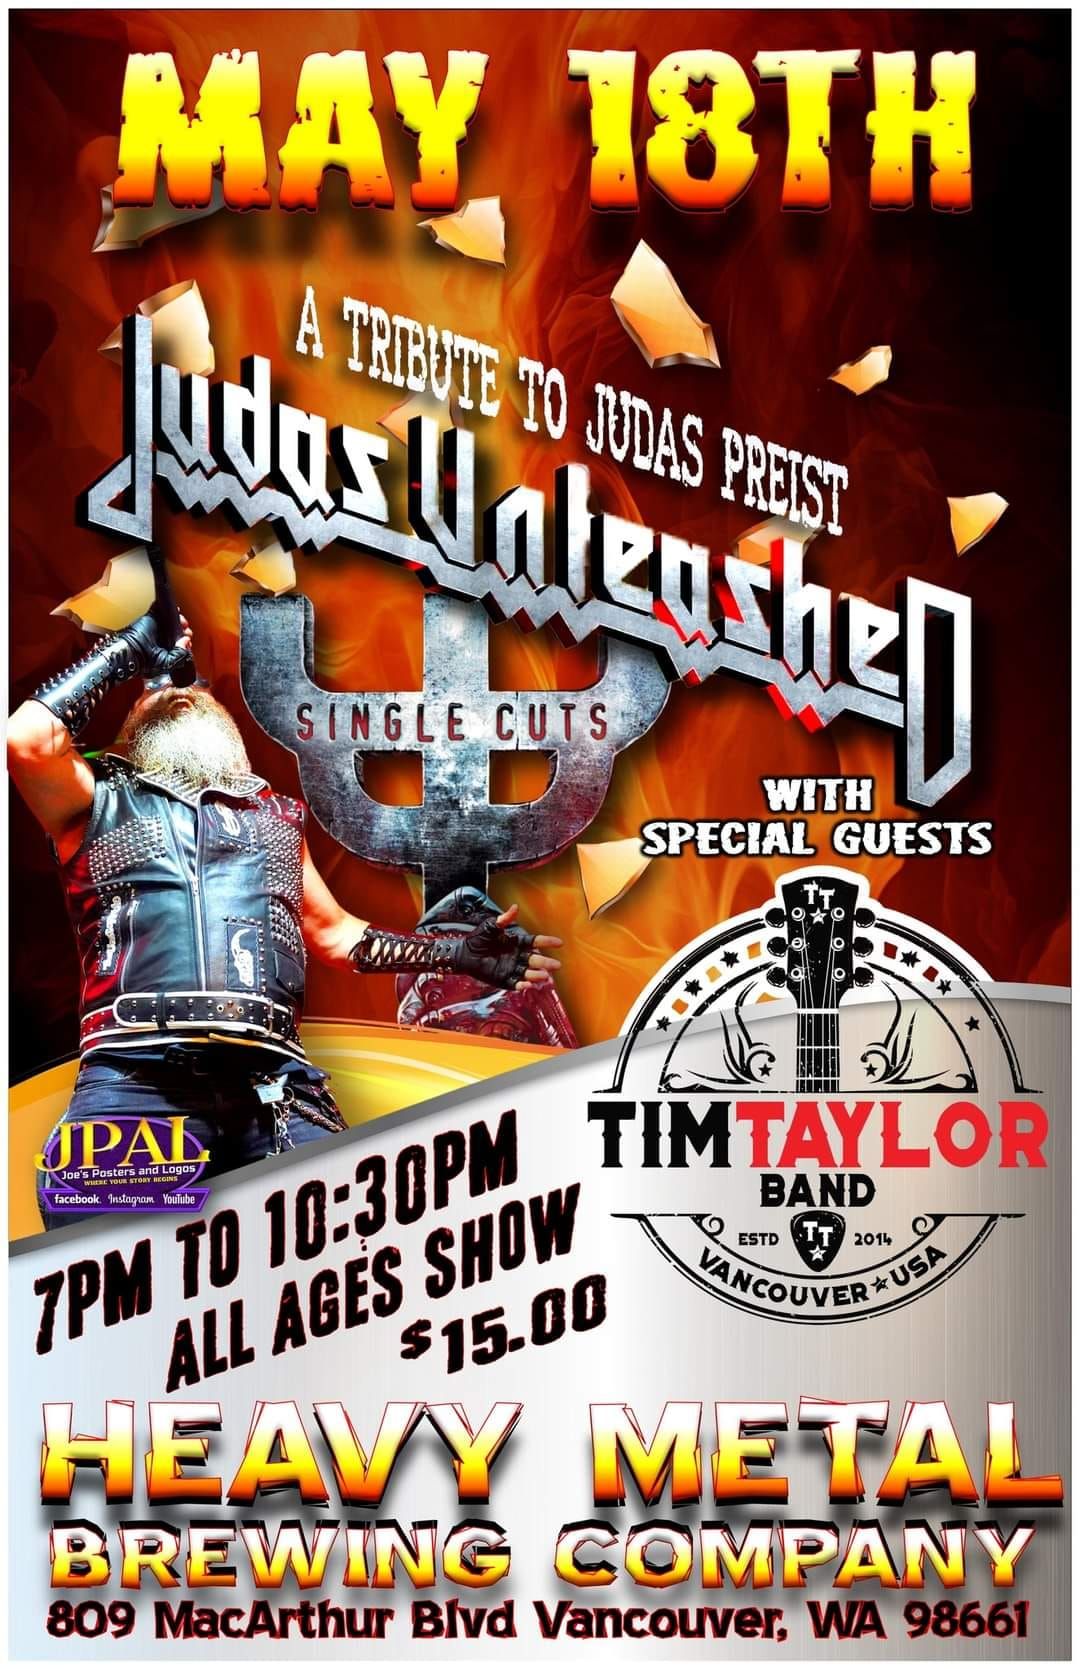 Judas Unleashed with Special Guest Tim Taylor Band